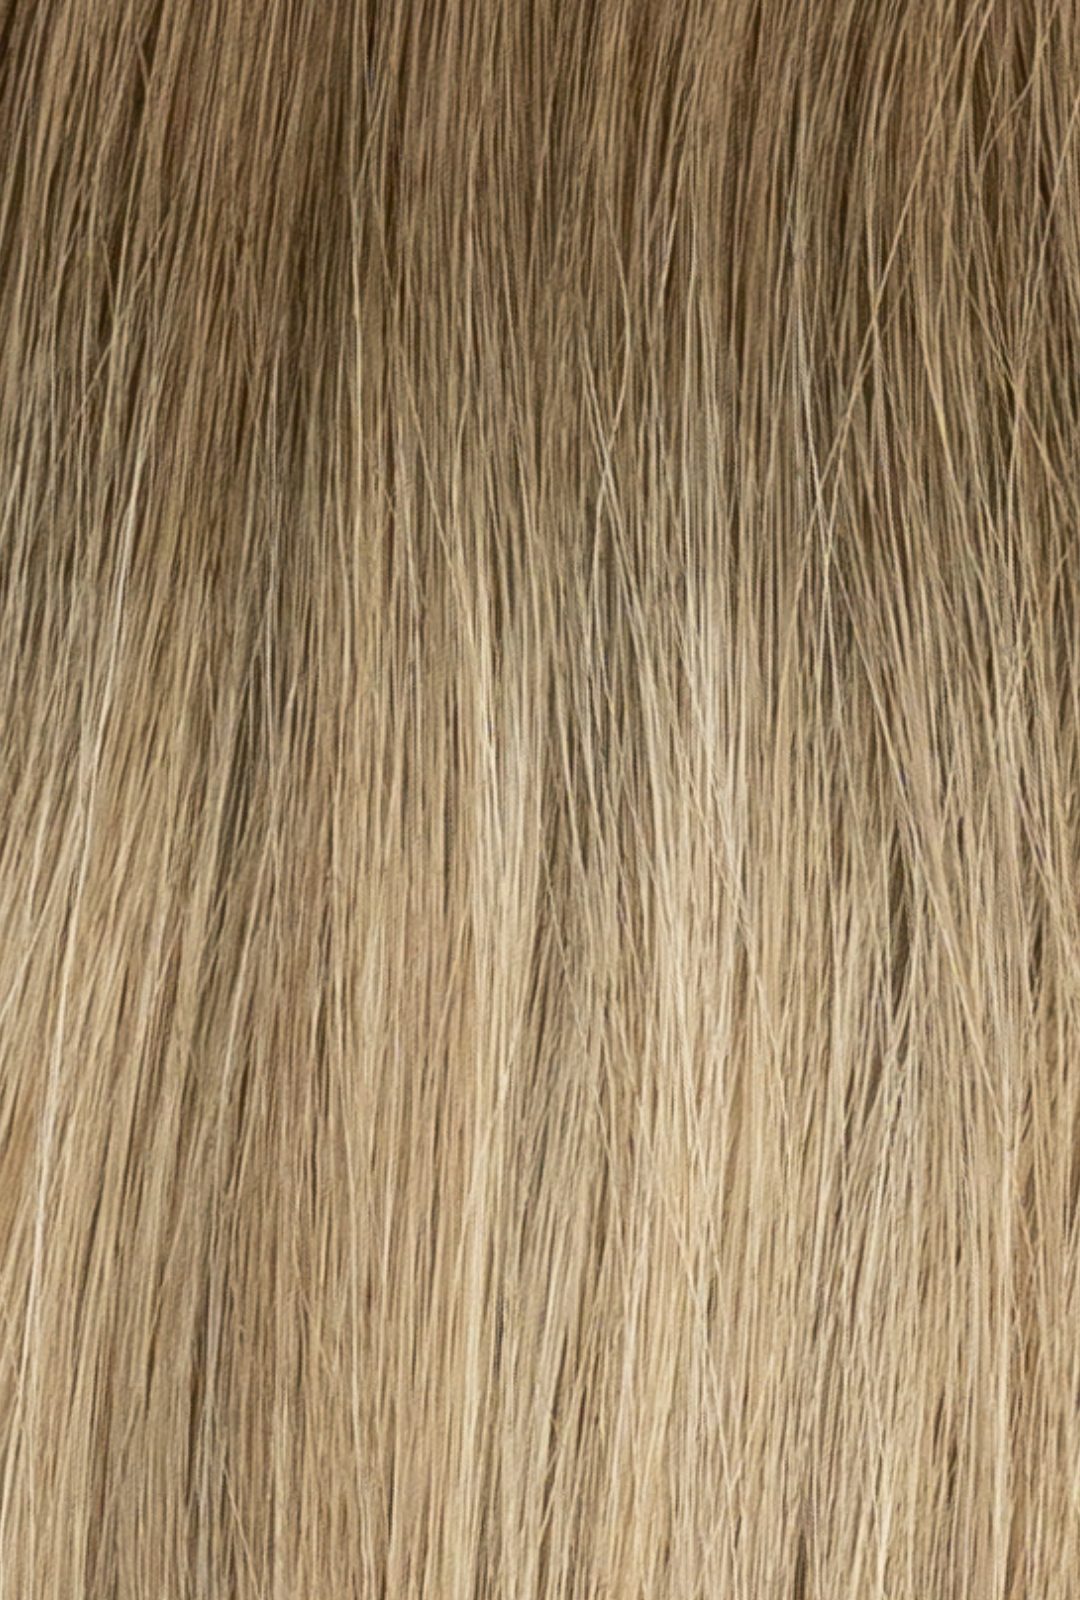 Laced Hair Machine Sewn Weft Extensions Rooted #6/D8/60